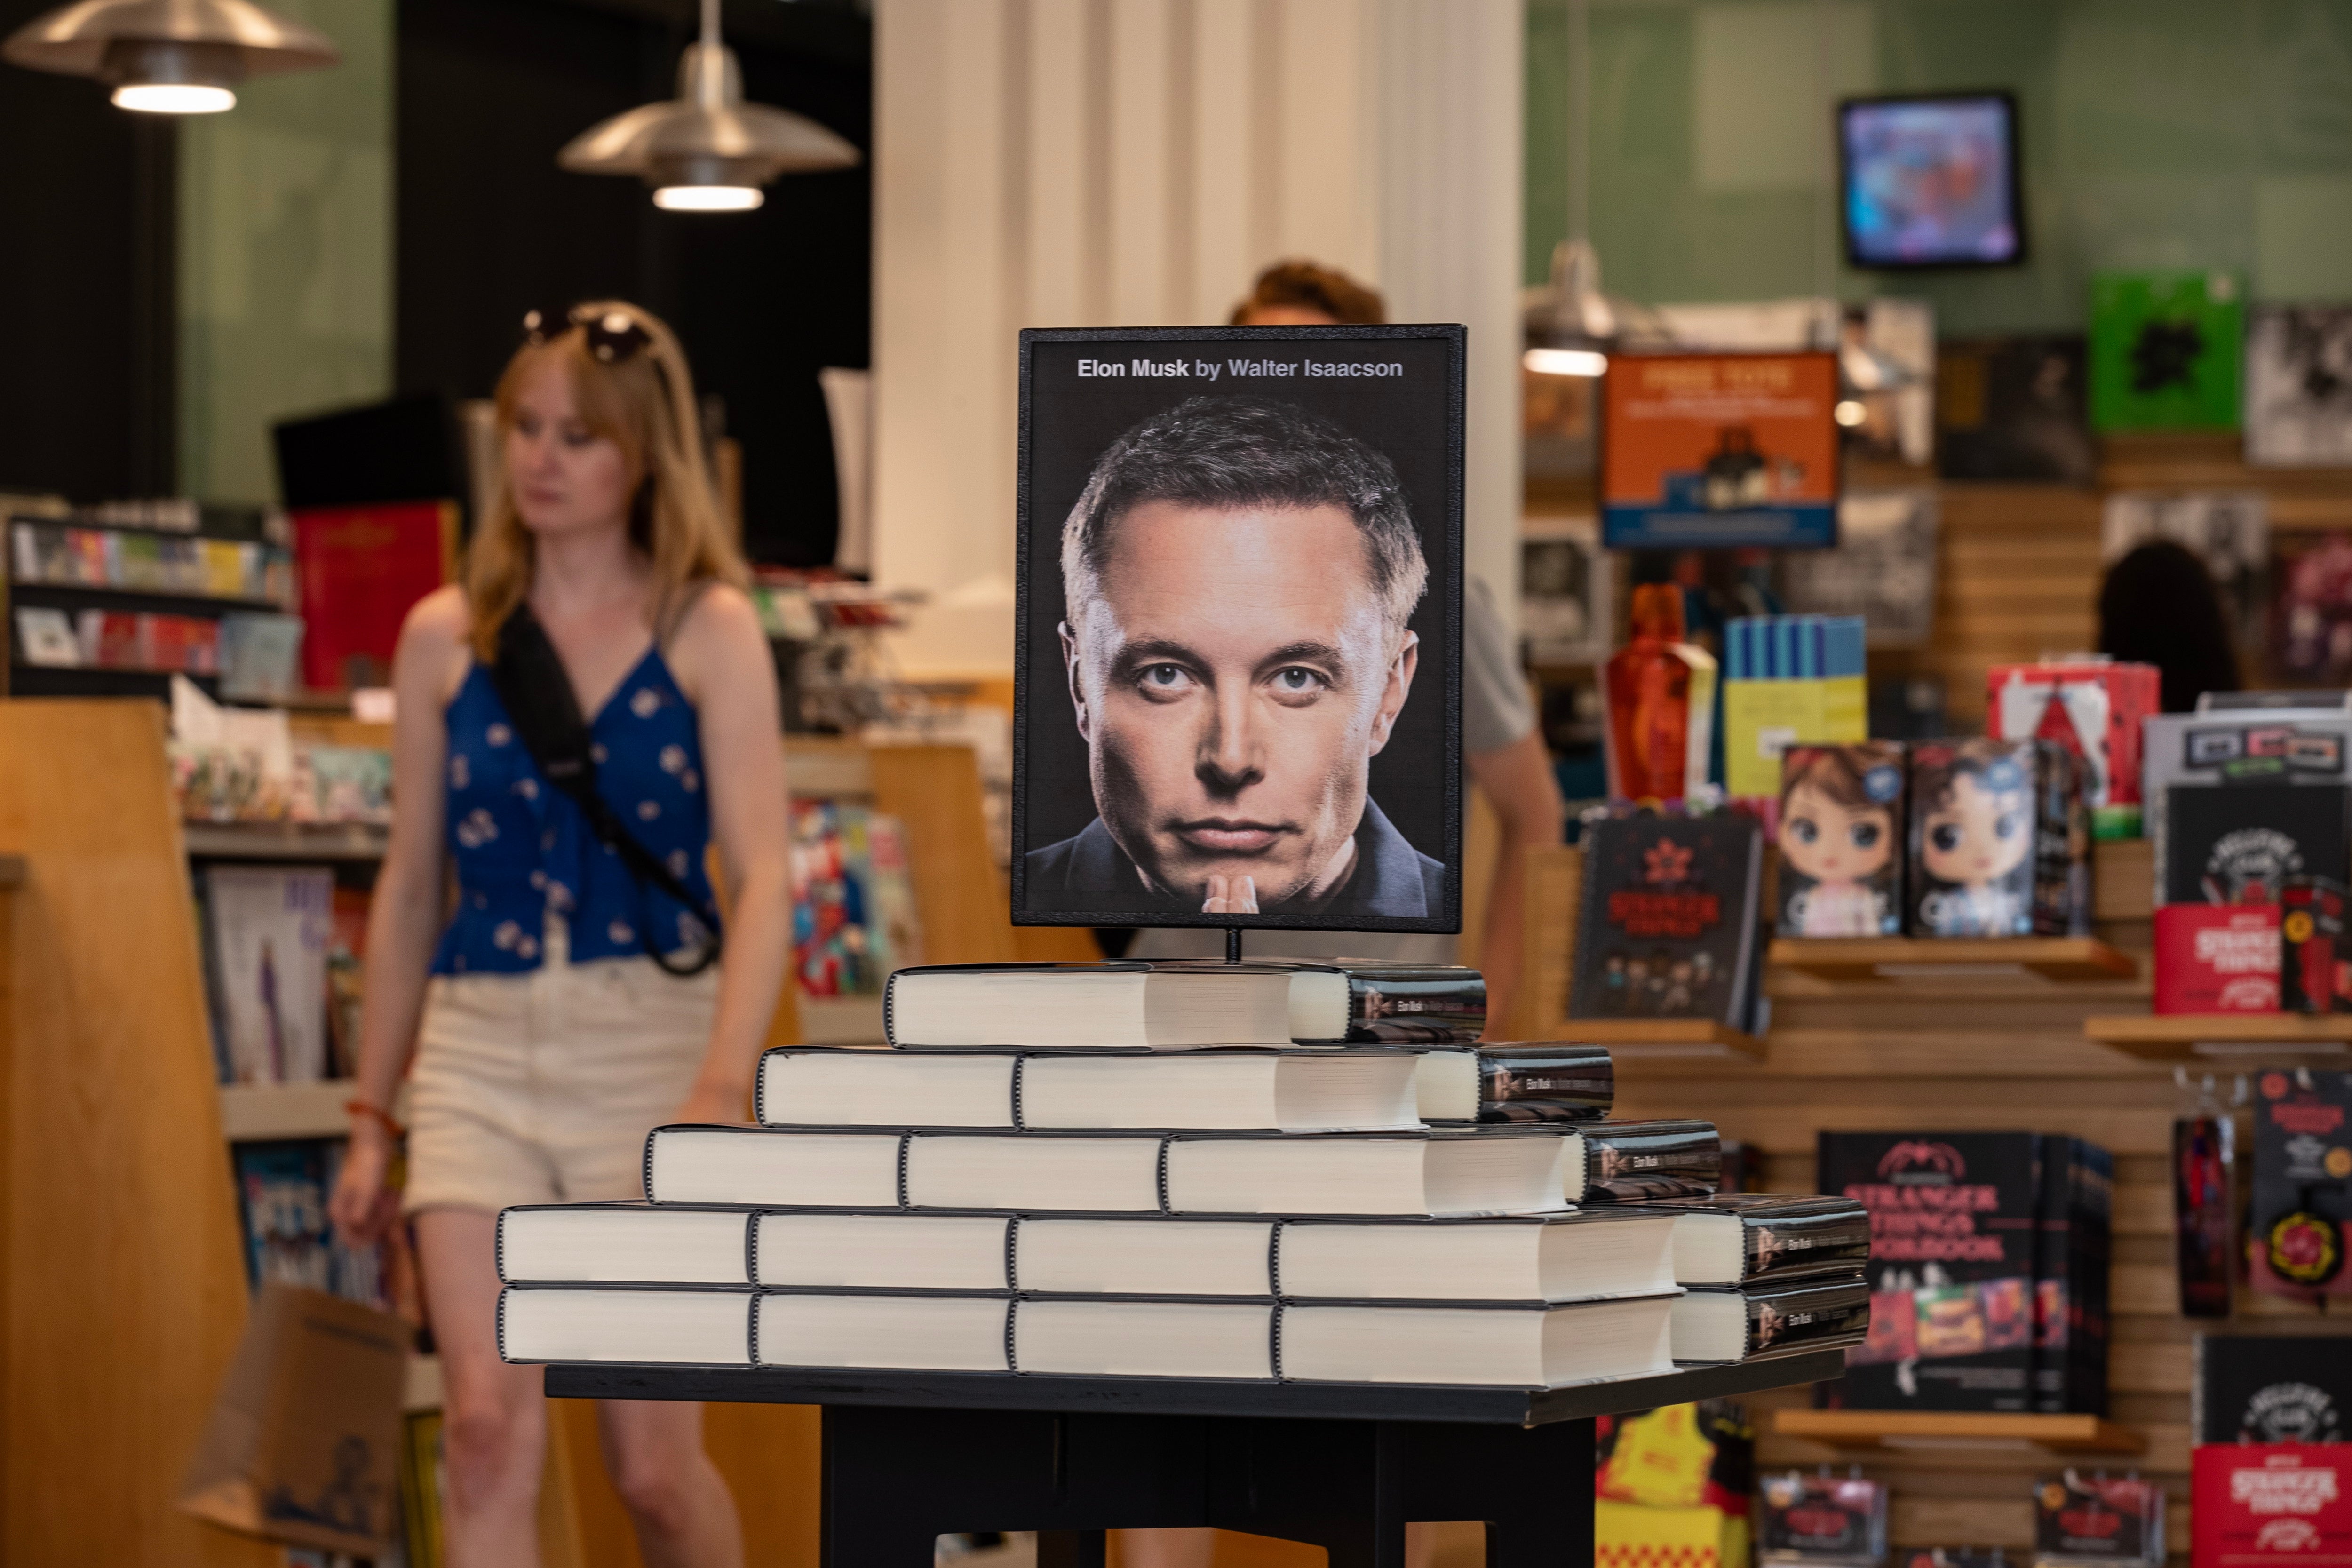 Brought to book: copies of Walter Isaacson’s unauthorised biography ‘Elon Musk' at a Barnes & Noble in Glendale, California